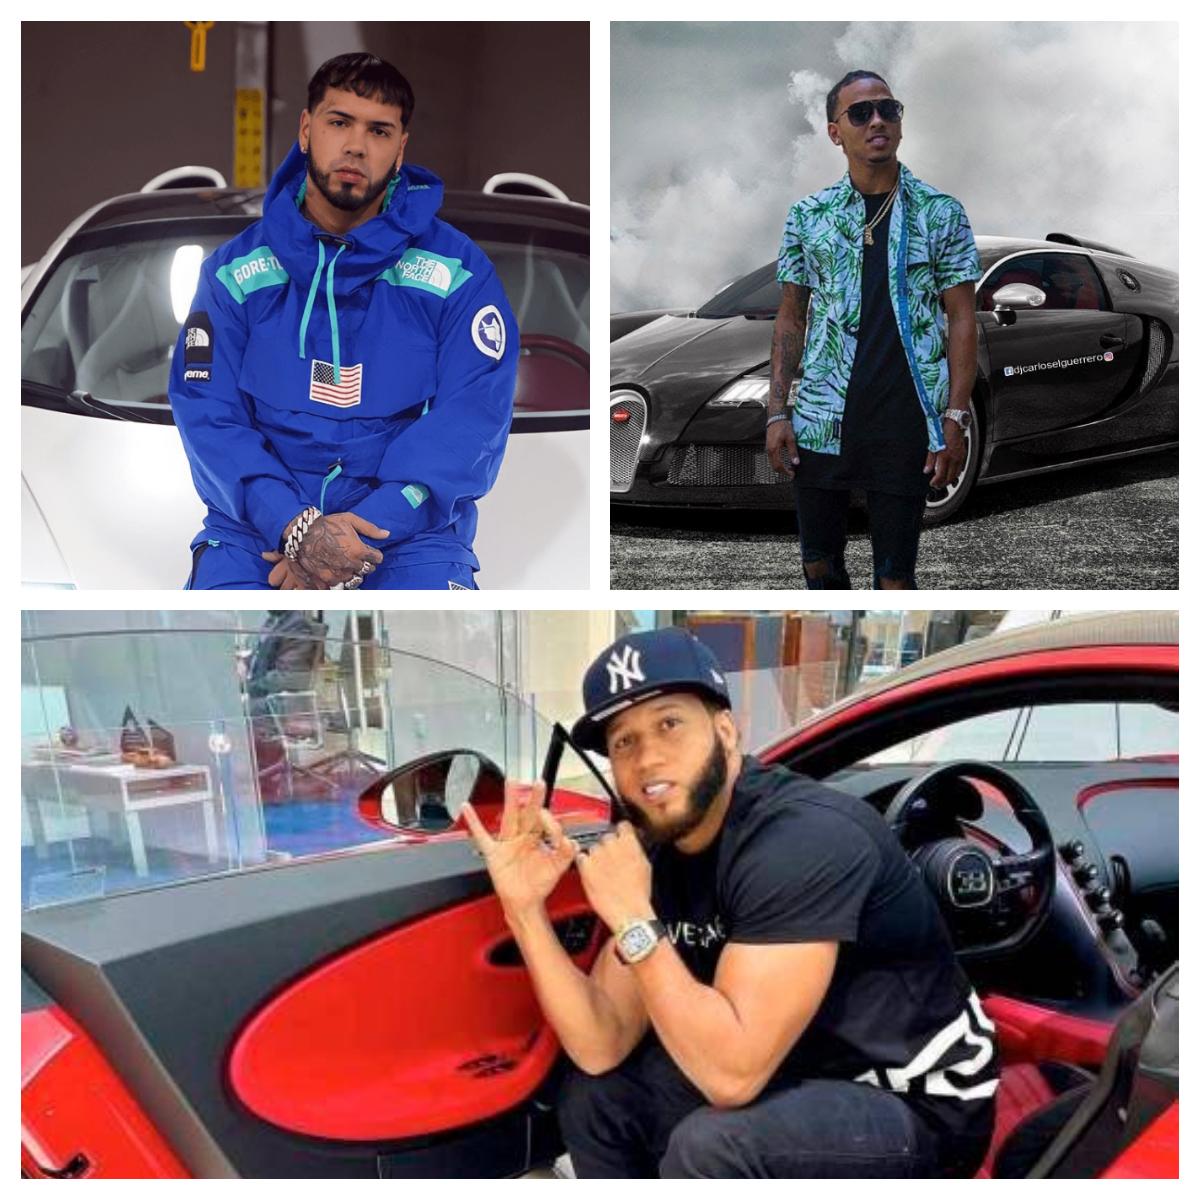 The answers of Anuel AA and Ozuna to the disclosures of the Alpha